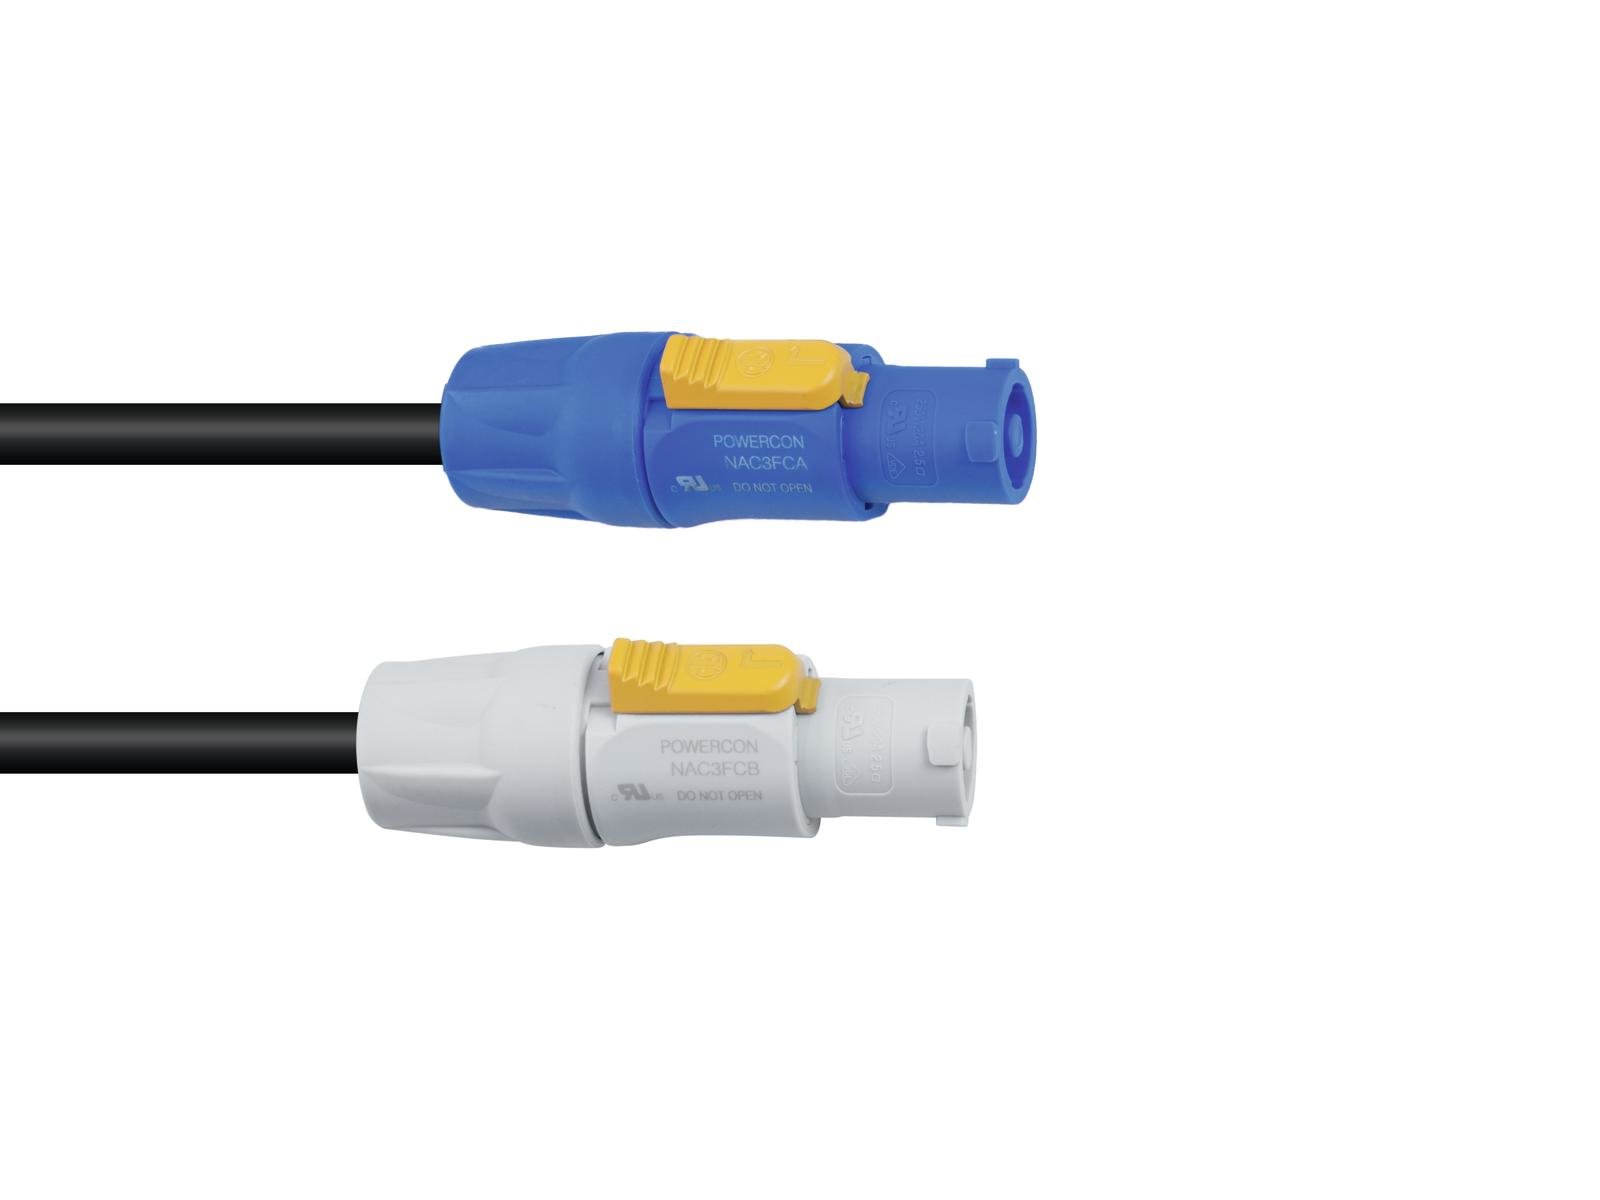 PSSO PowerCon Connection Cable 3×1.5 1m